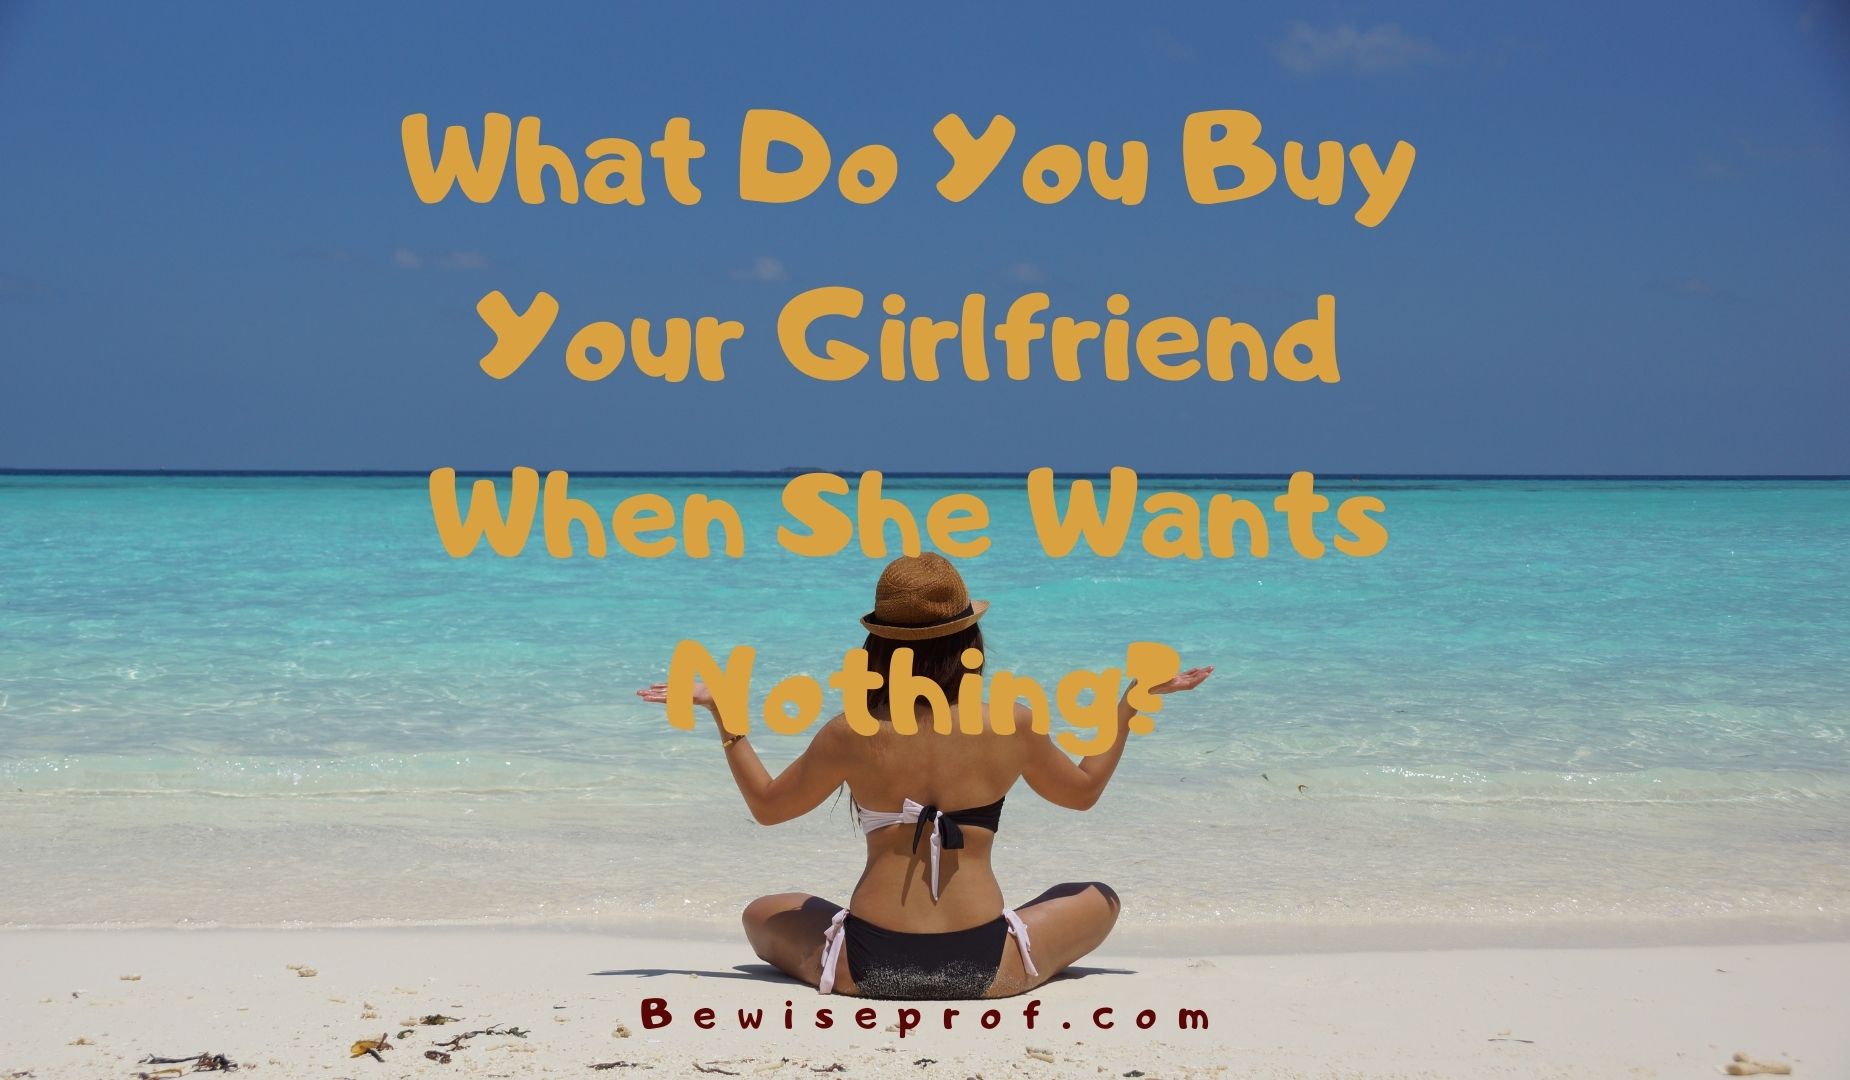 What Do You Buy Your Girlfriend When She Wants Nothing?